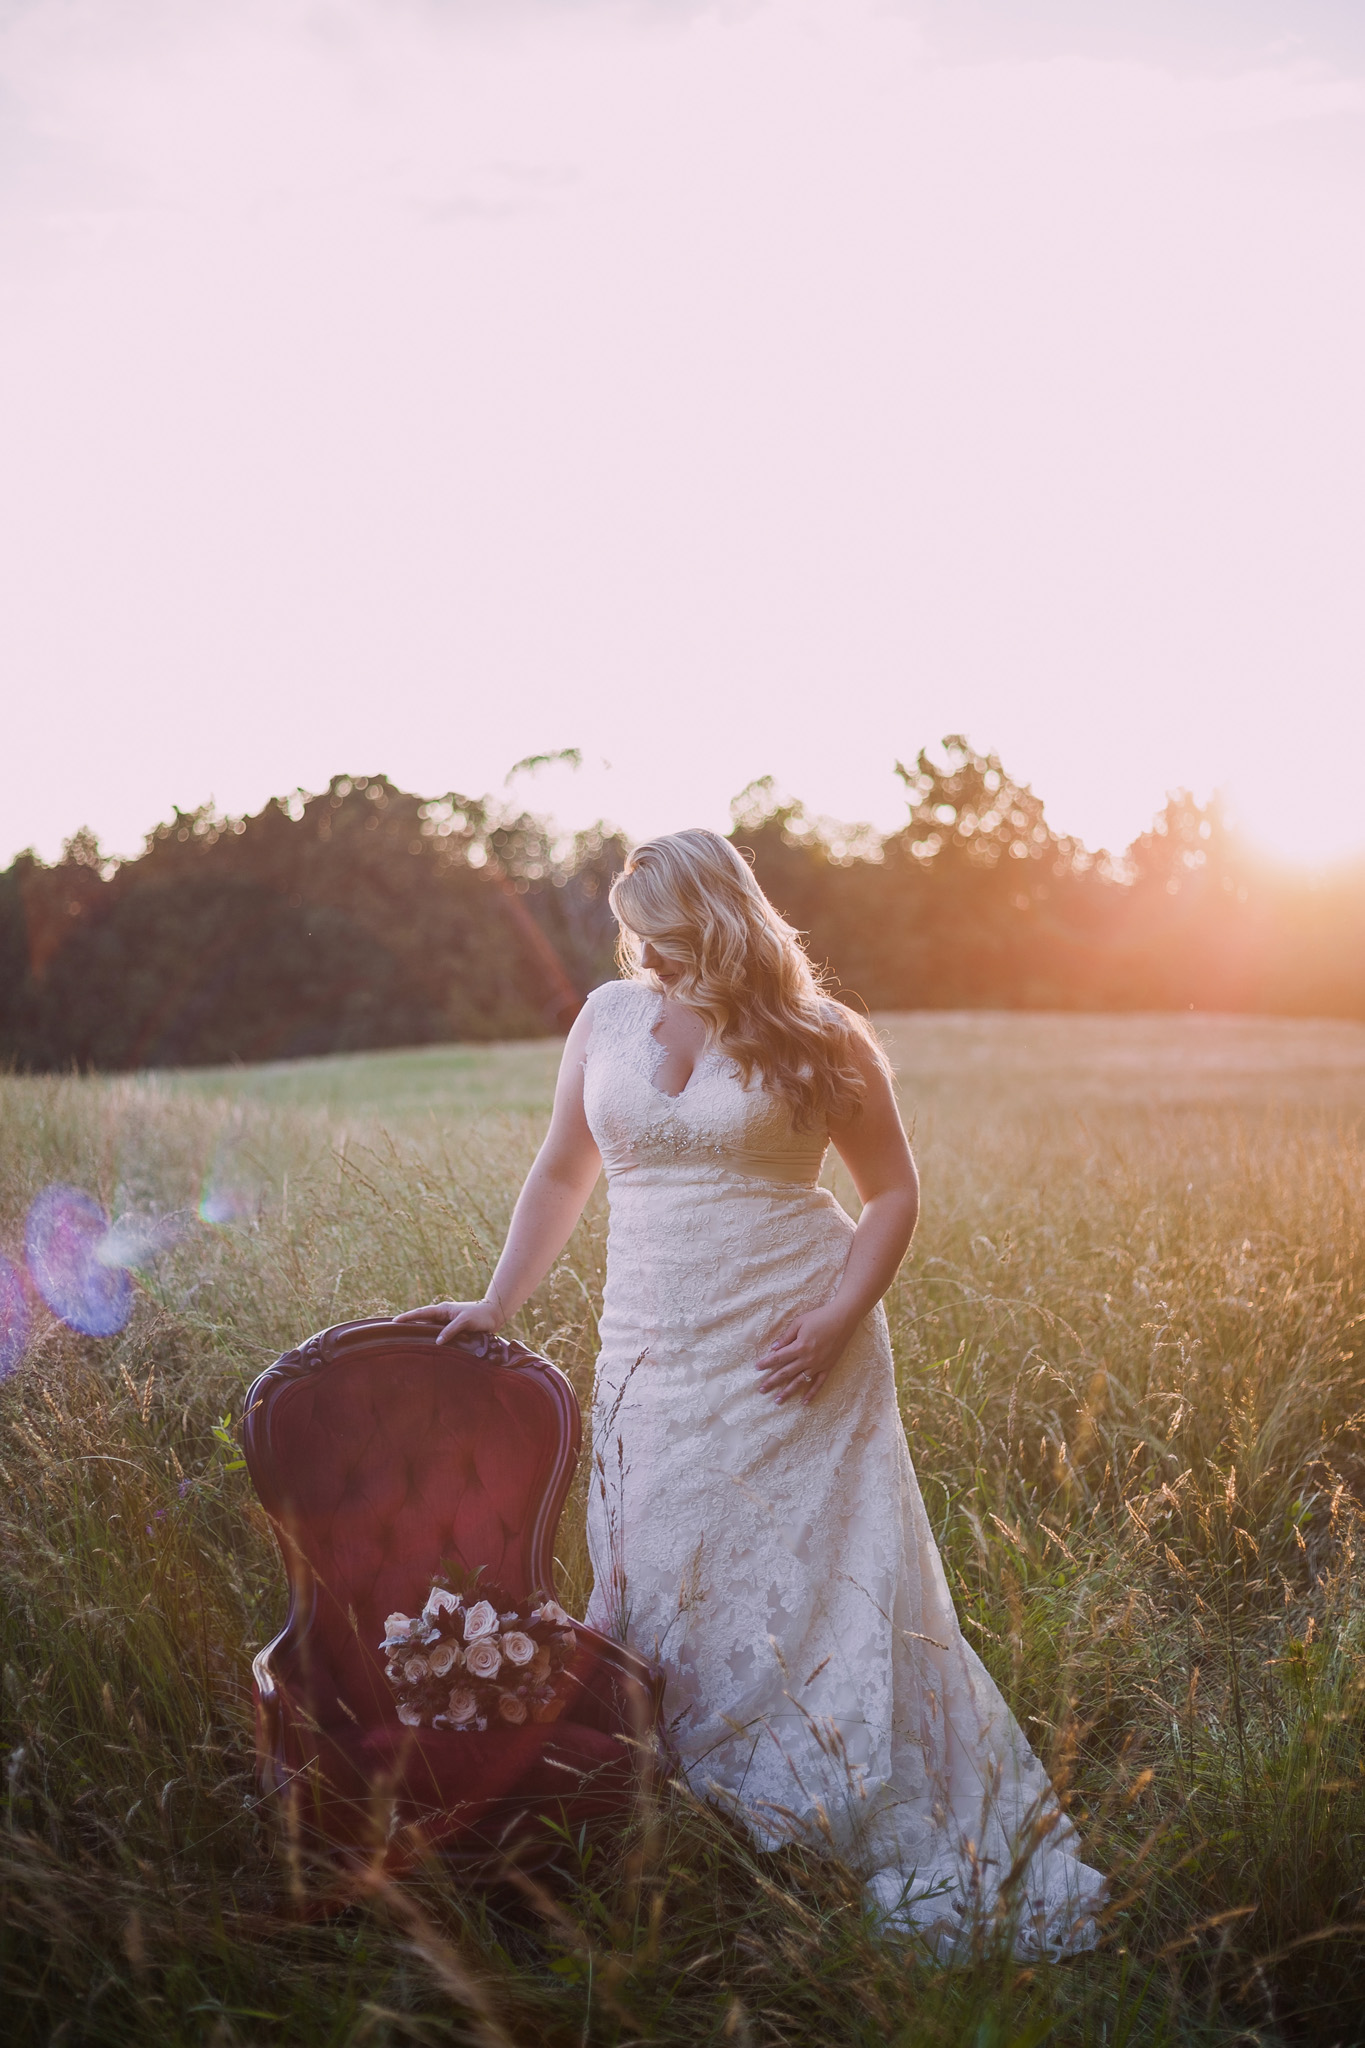 A red velvet chair is the perfect prop for this lovely bride at her Asheboro North Carolina bridal portrait session by Mabyn Ludke